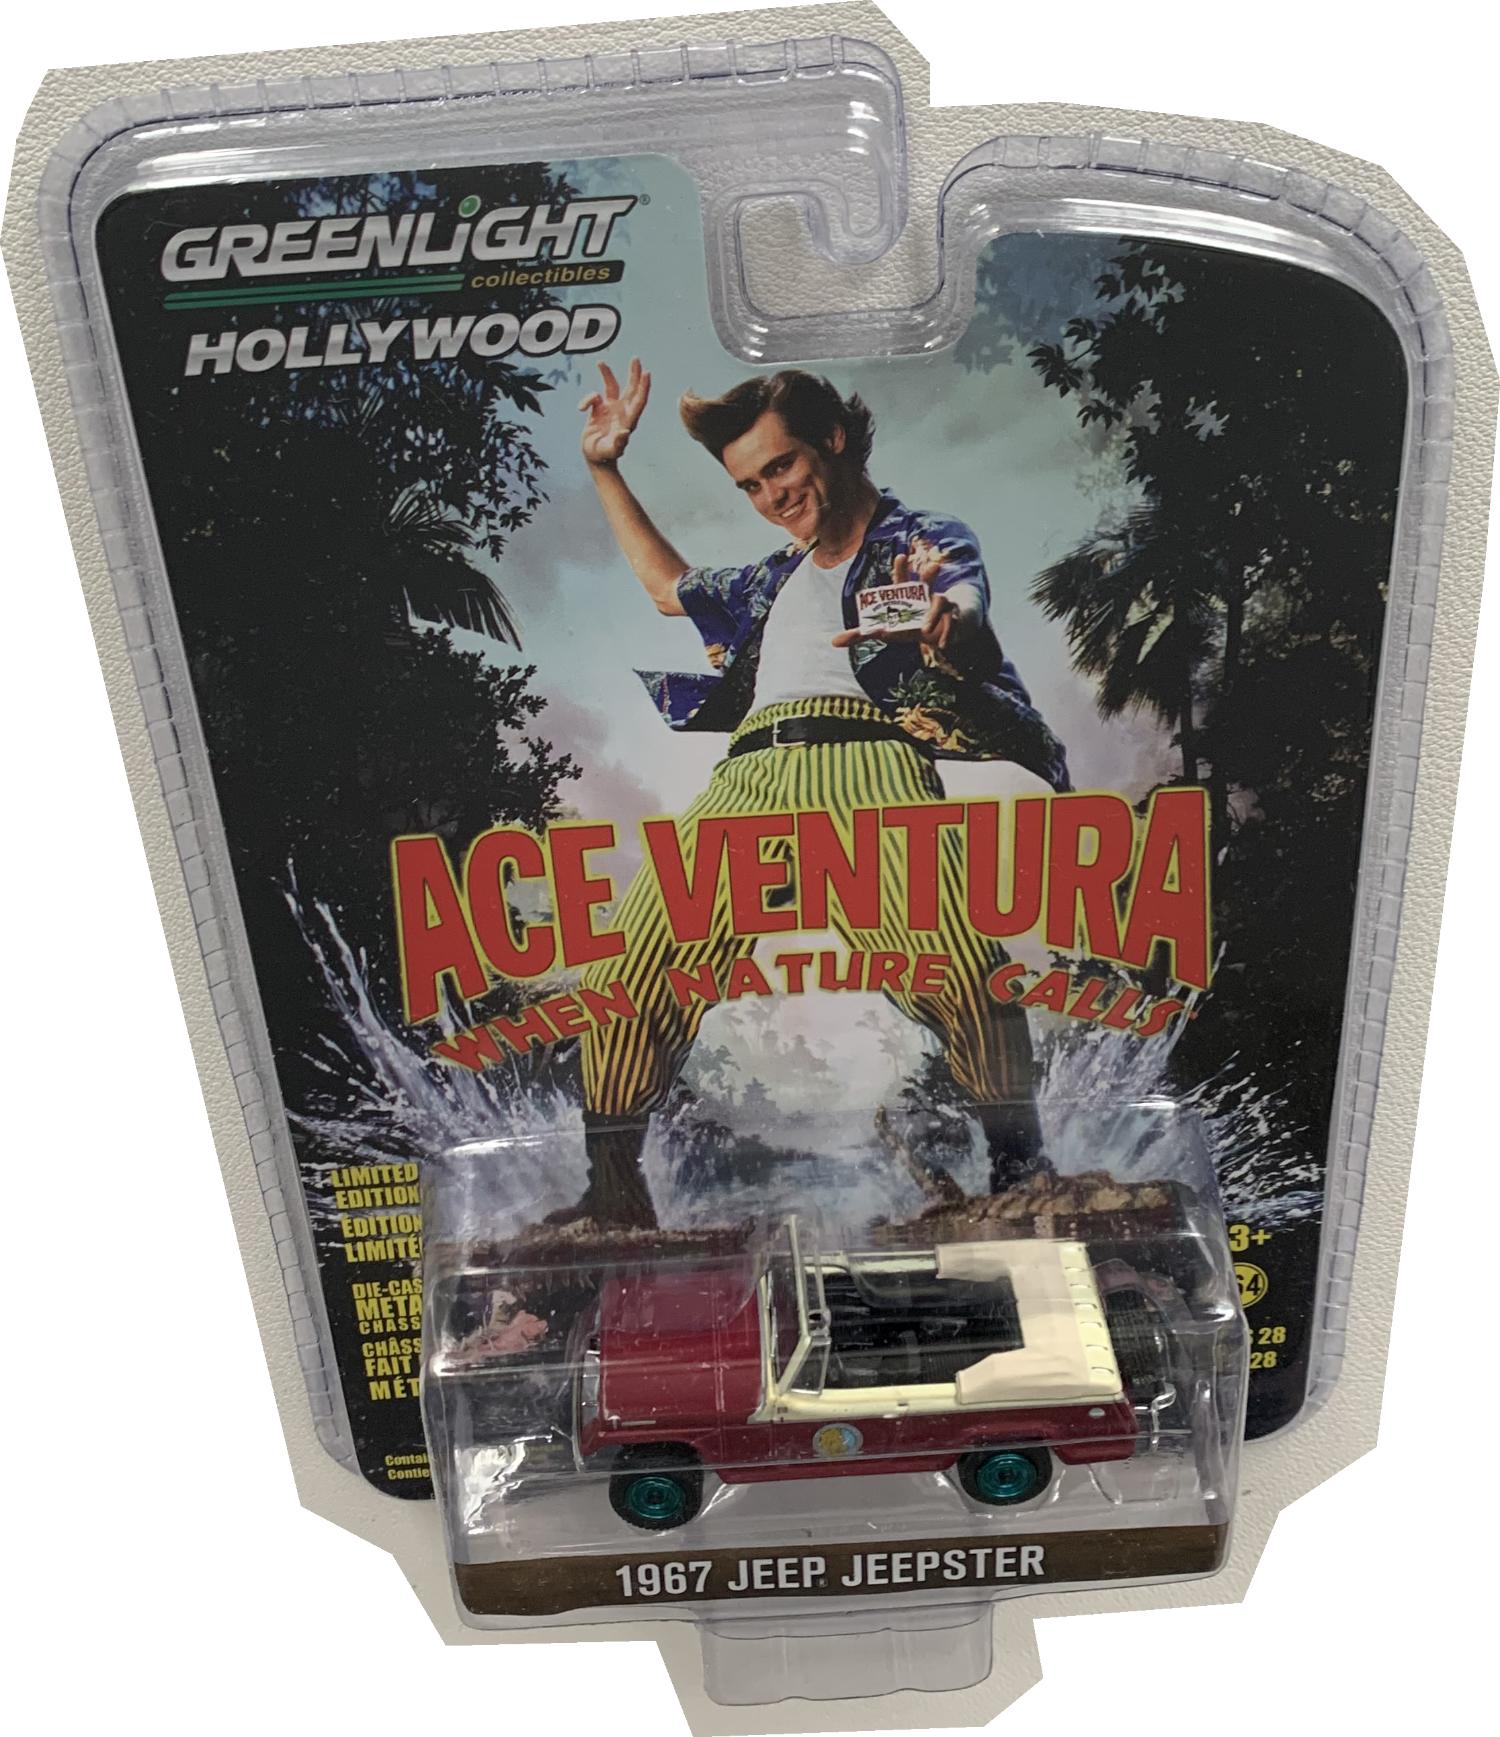 Ace Ventura ' When nature calls' 1967 Jeep Jeepster in red with green wheels 1:64 scale model from Greenlight, Green Machines, limited edition